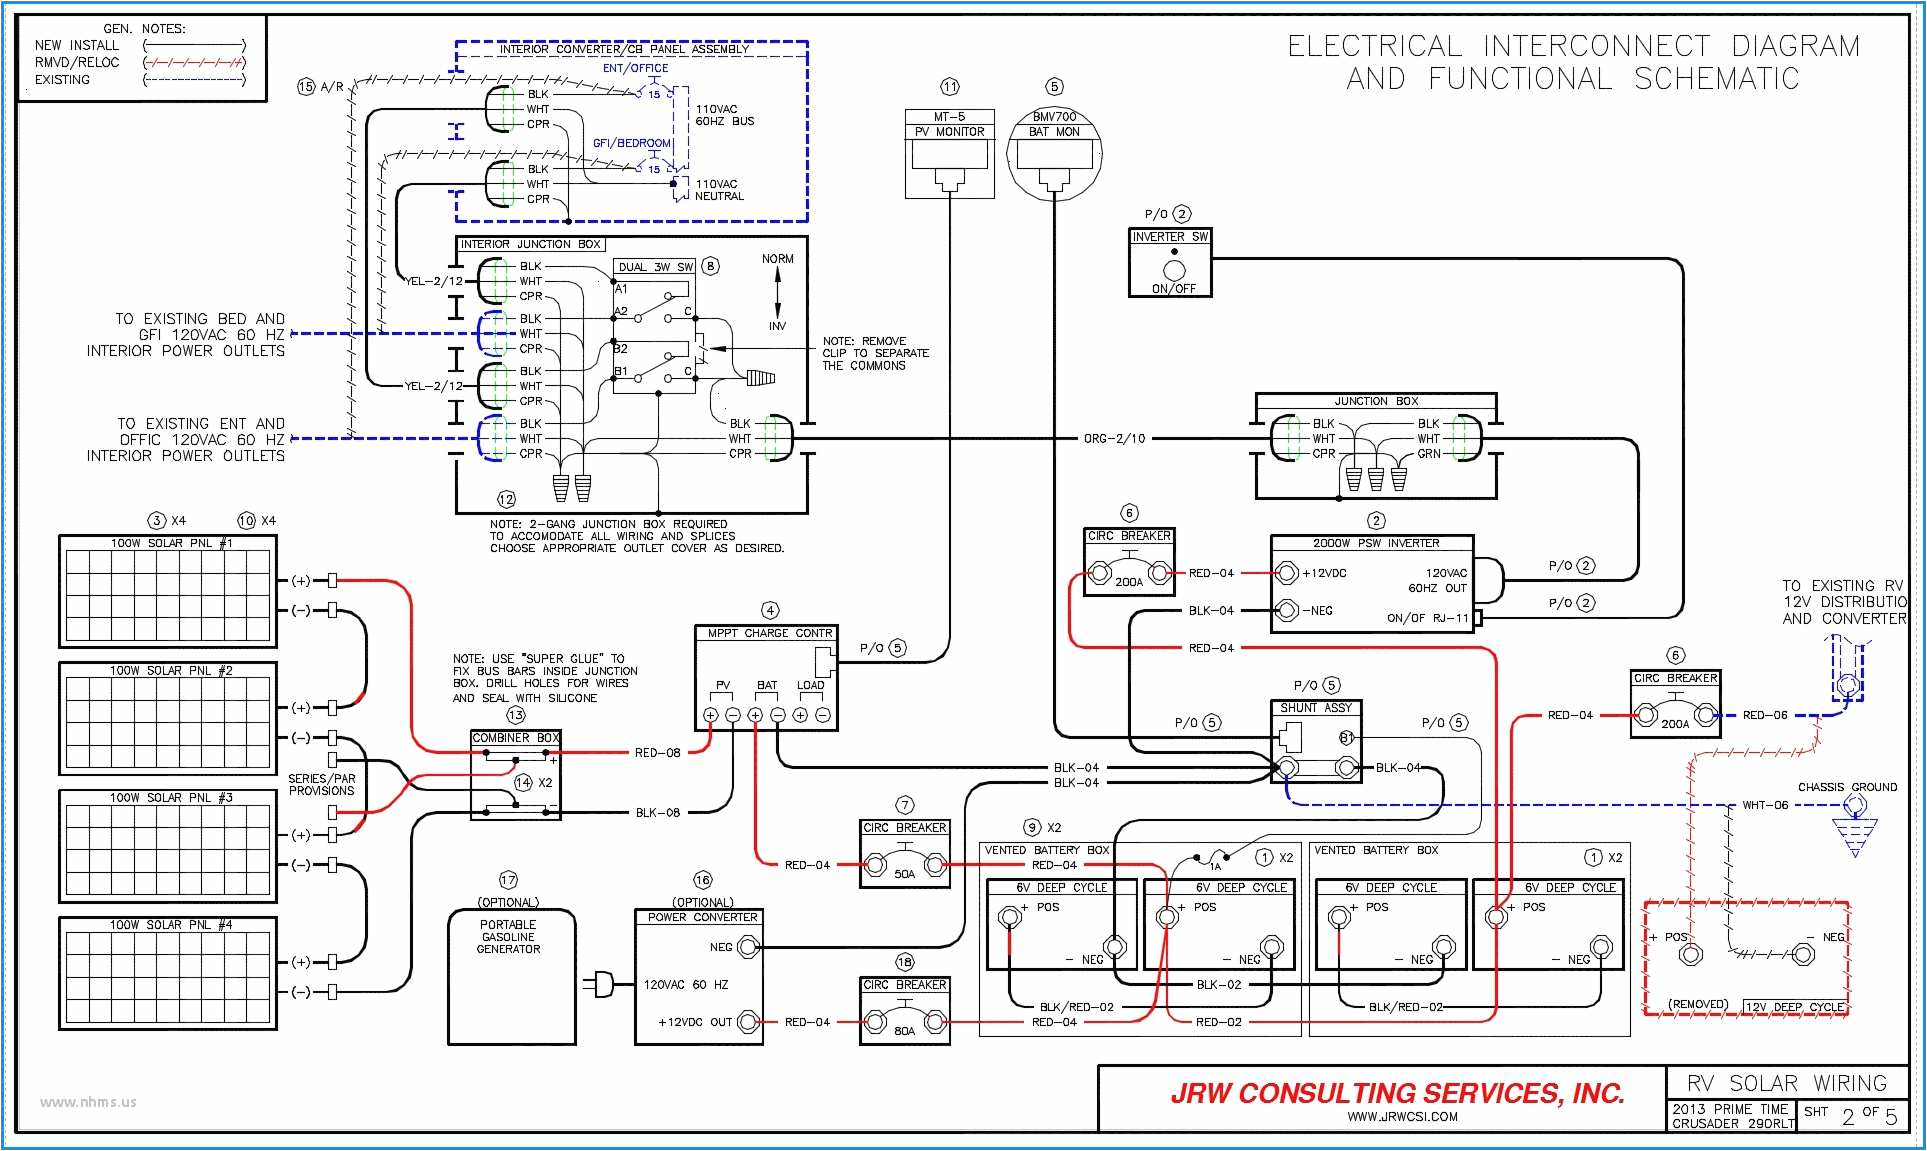 rv cable and satellite wiring diagram unequaled damon motorhome wiring diagrams damon motorhome manuals of rv cable and satellite wiring diagram jpg